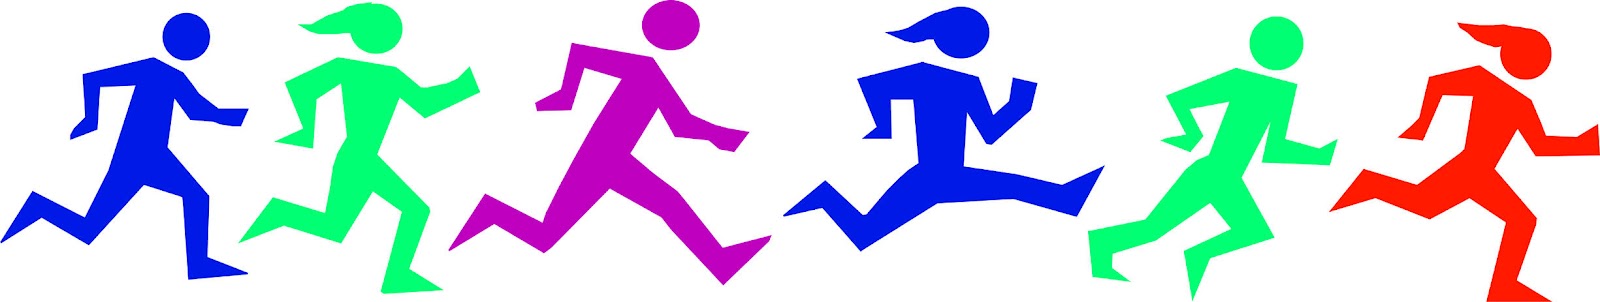 Runner running a race clipart free images 2